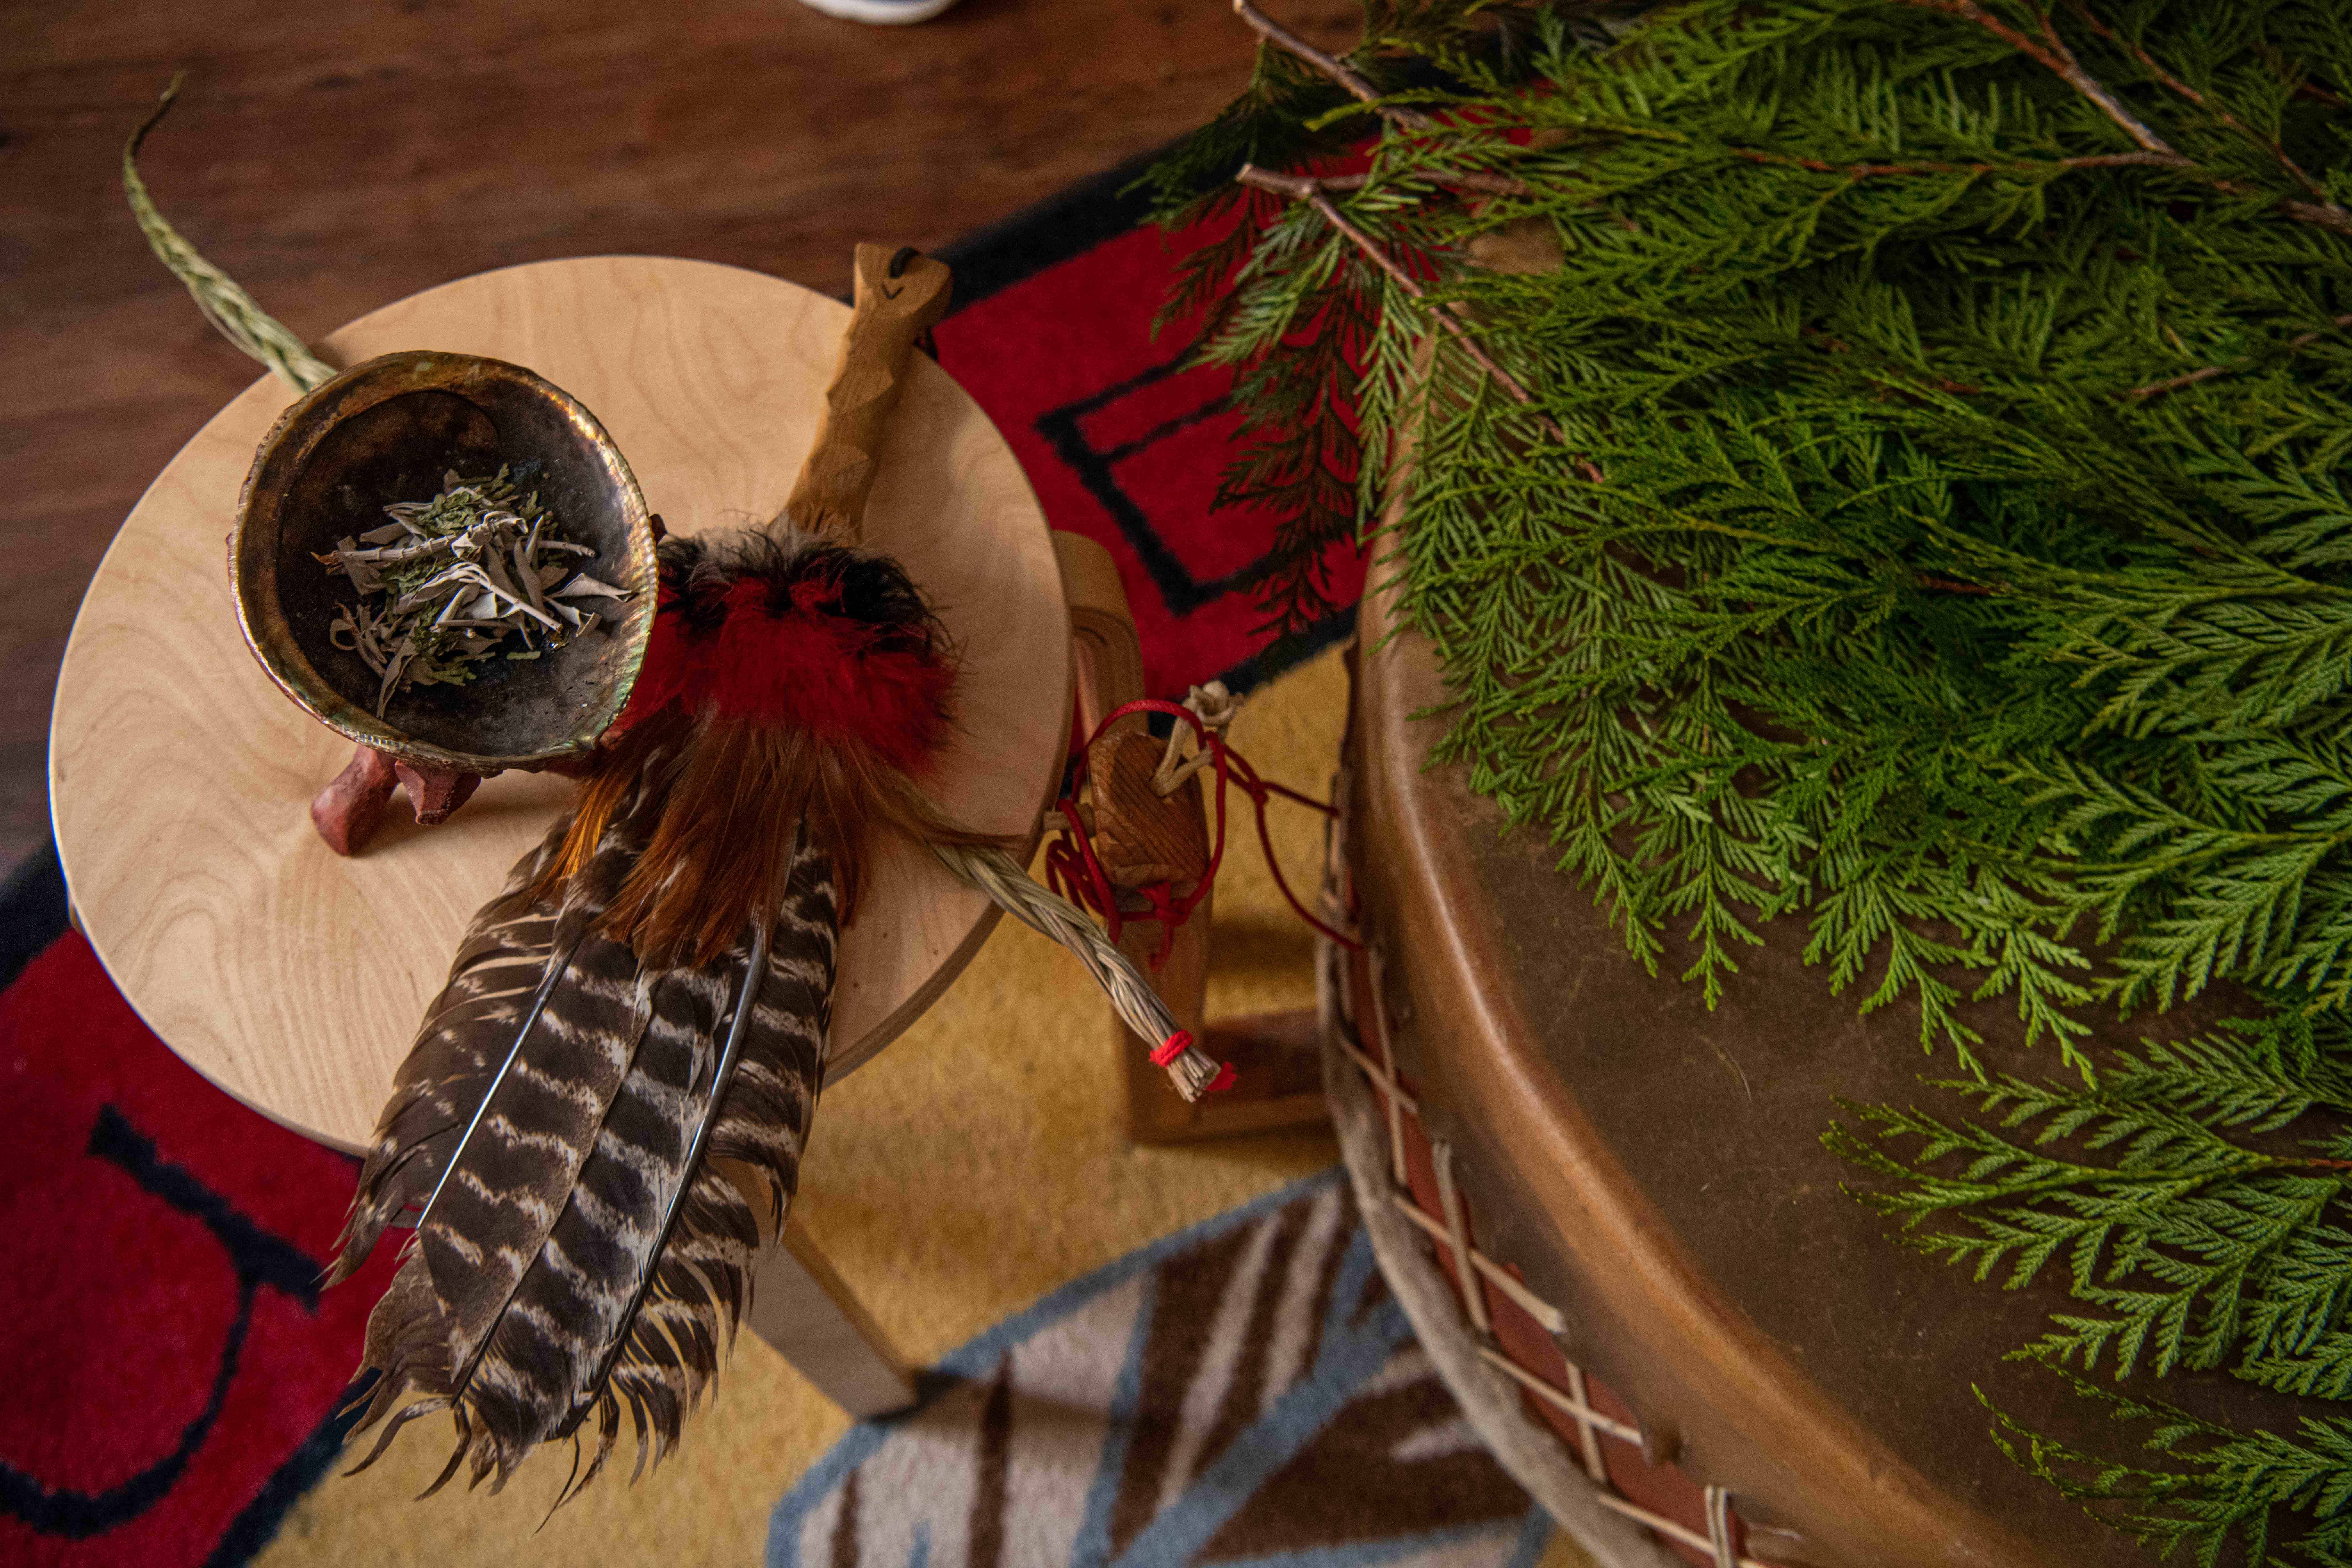 Indigenous health care and wellness at PHC includes cultural ceremonies, talking circles, smudging, drumming, and traditional medicines as part of a holistic care experience.